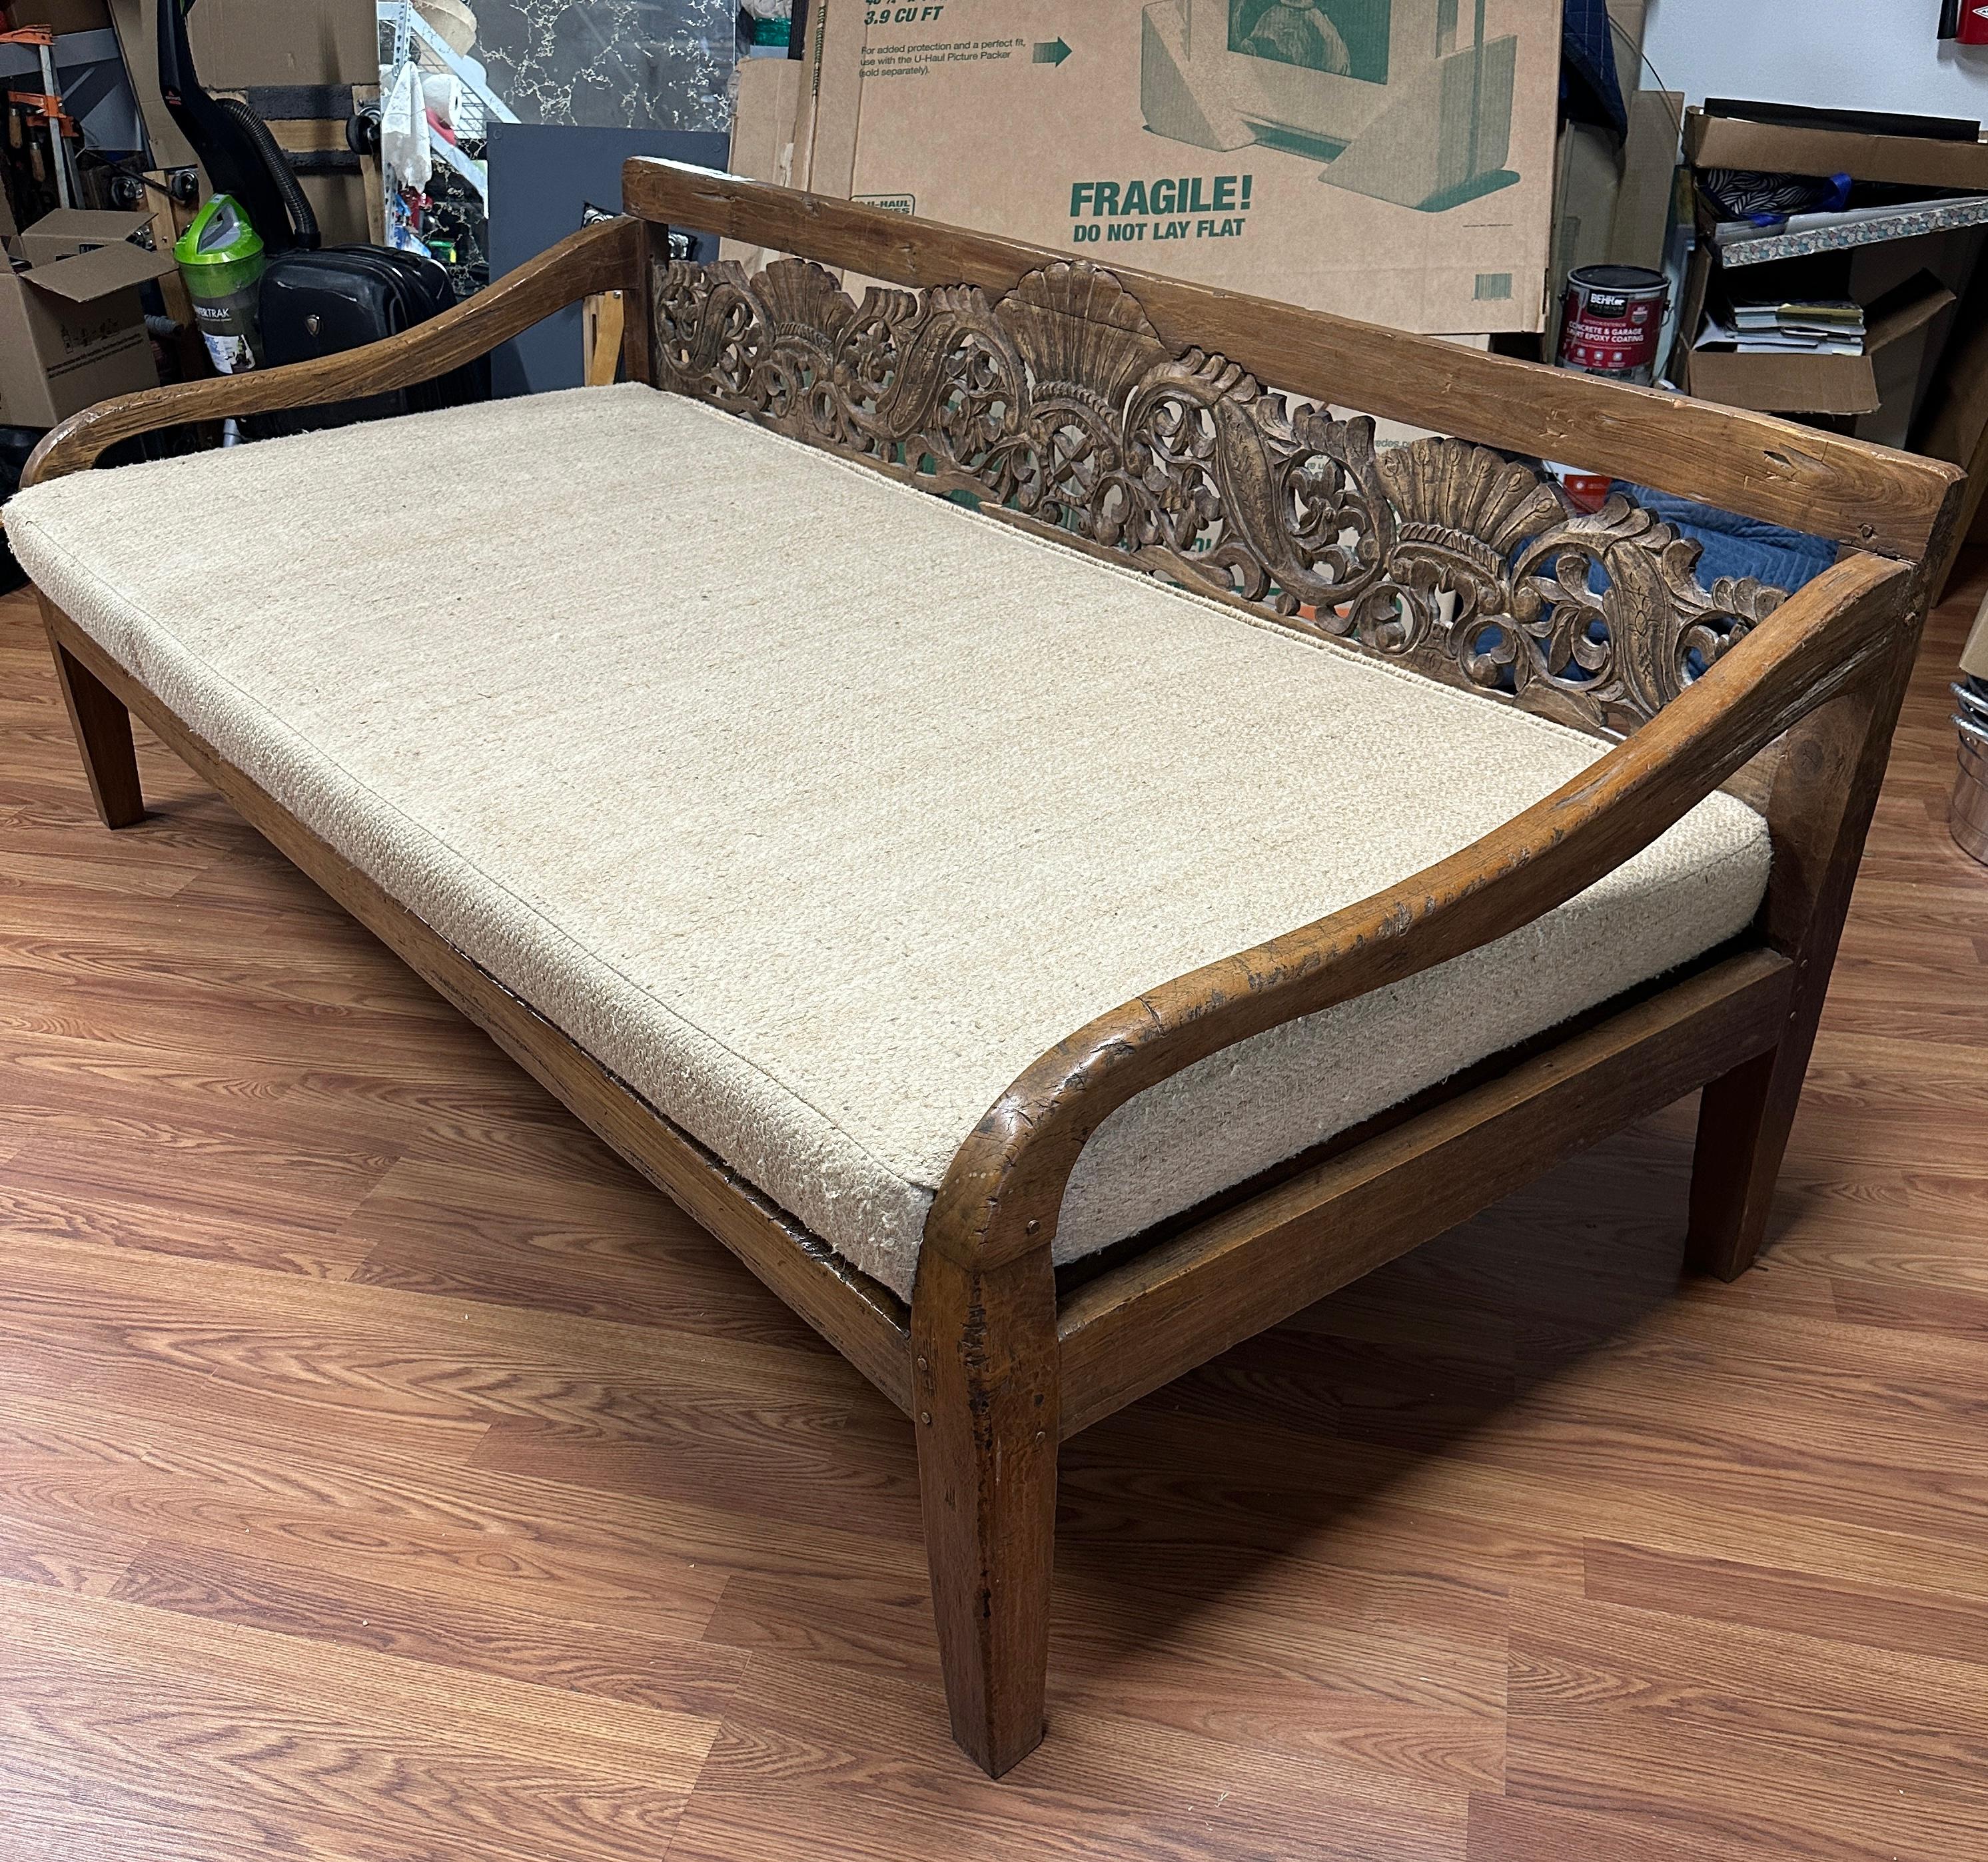 Balinese Carved Teak Daybed Sofa For Sale